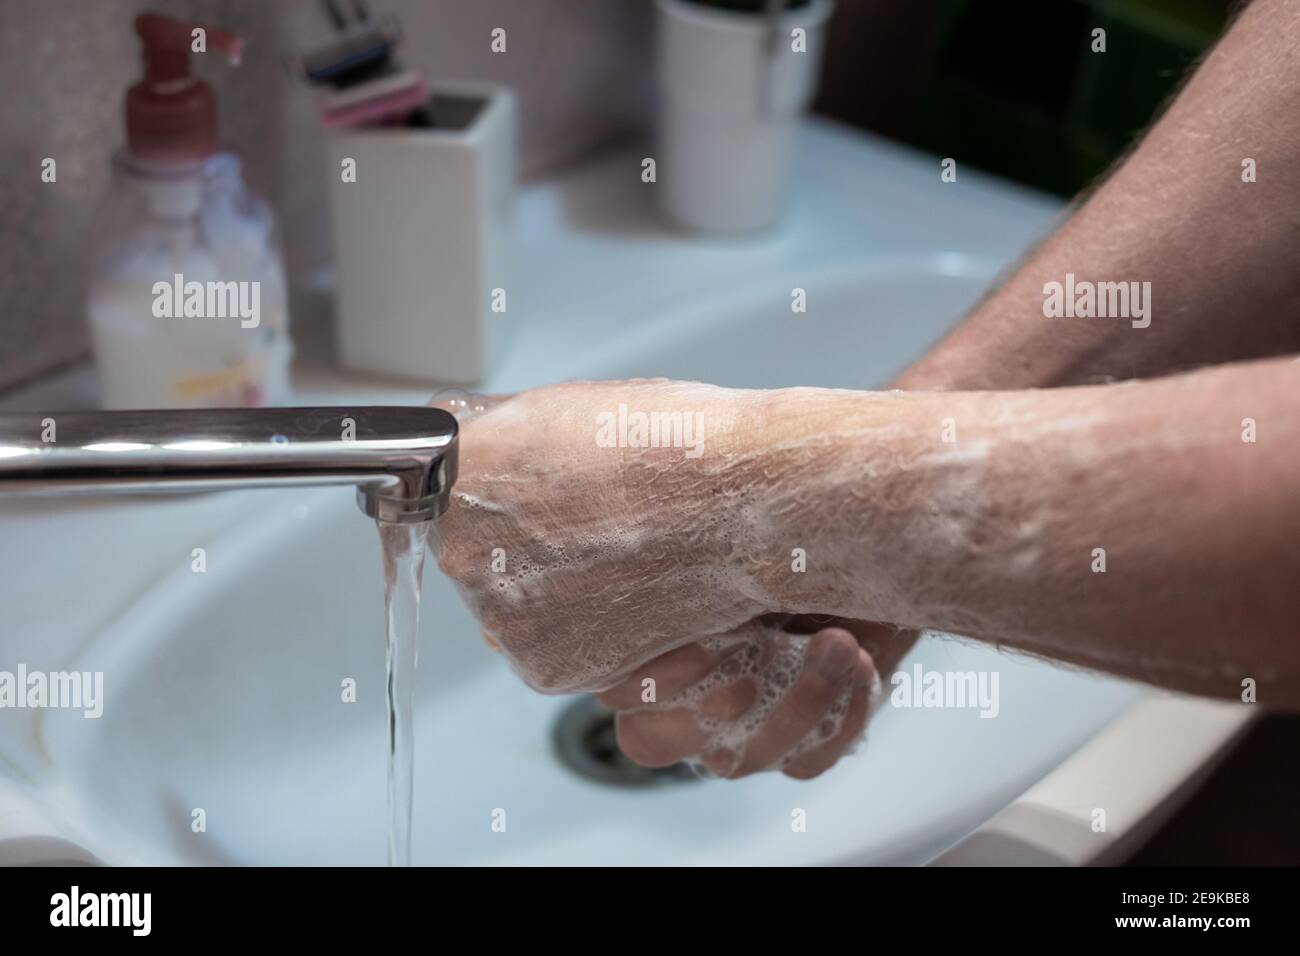 hand washing with liquid soap at home, hygiene and prevention of coronavirus and various infectious diseases Stock Photo